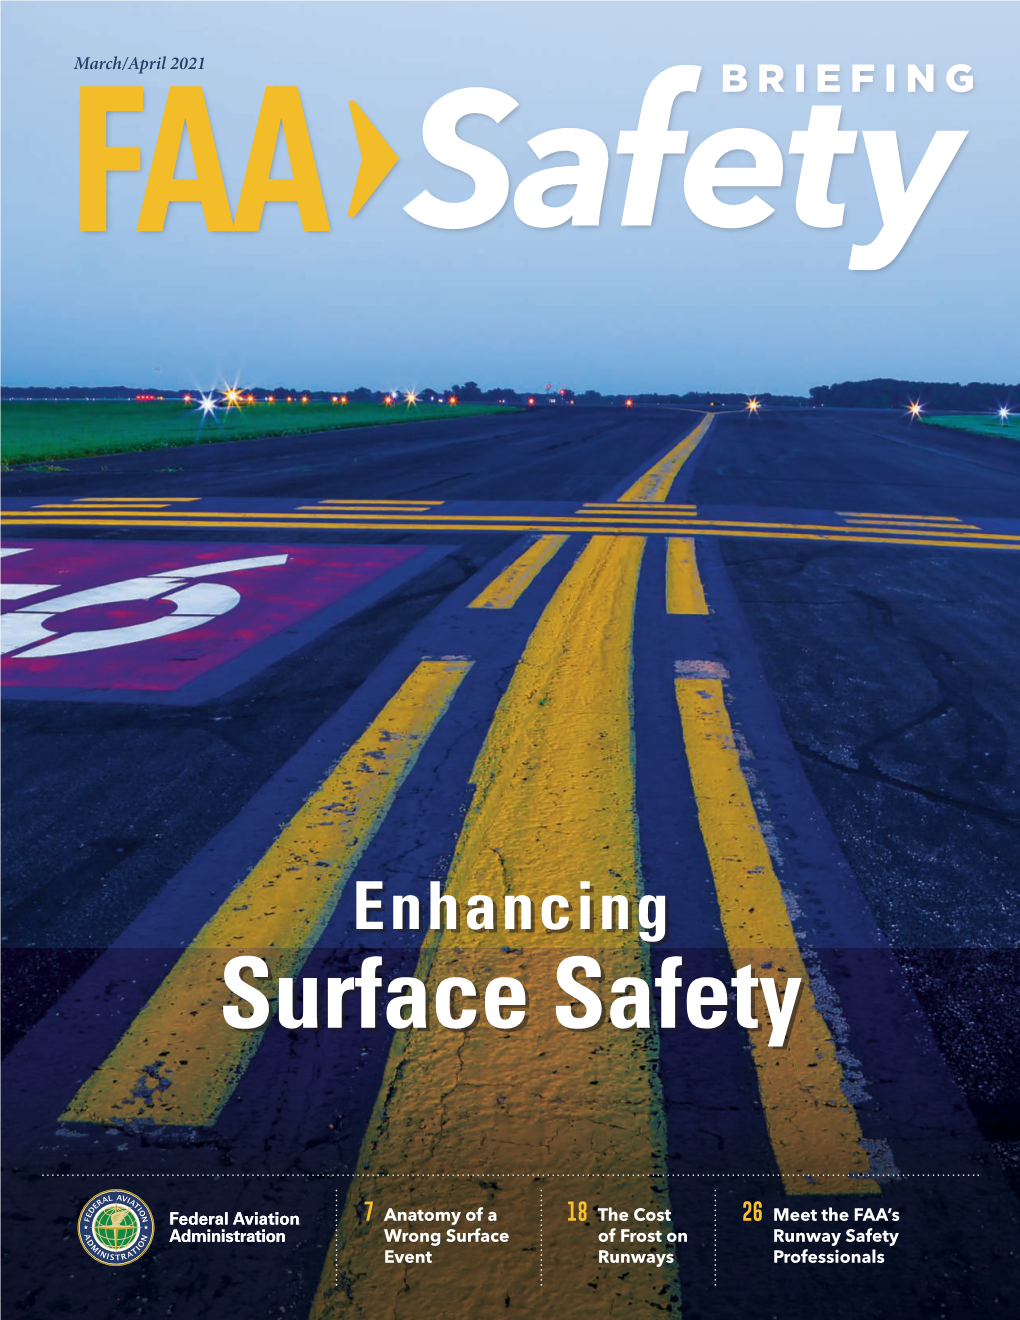 FAA Safety Briefing- March April 2021